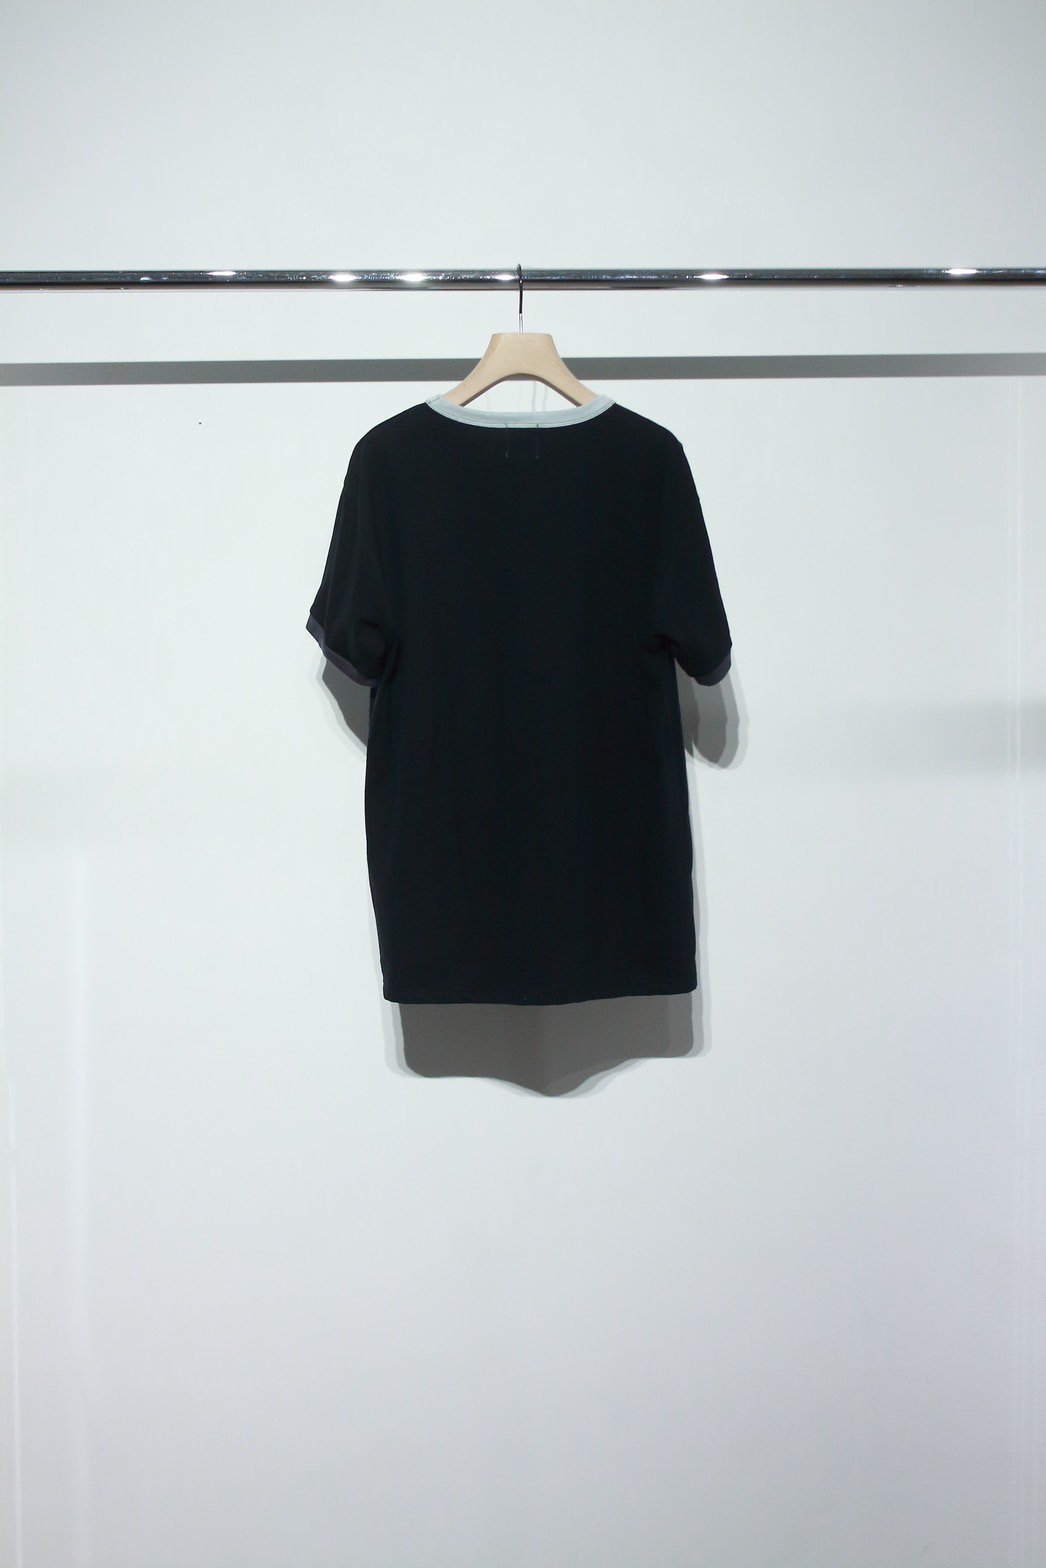 soe<br />Ringer T Shirts WORLD IMAGE / BLACK<img class='new_mark_img2' src='https://img.shop-pro.jp/img/new/icons47.gif' style='border:none;display:inline;margin:0px;padding:0px;width:auto;' />